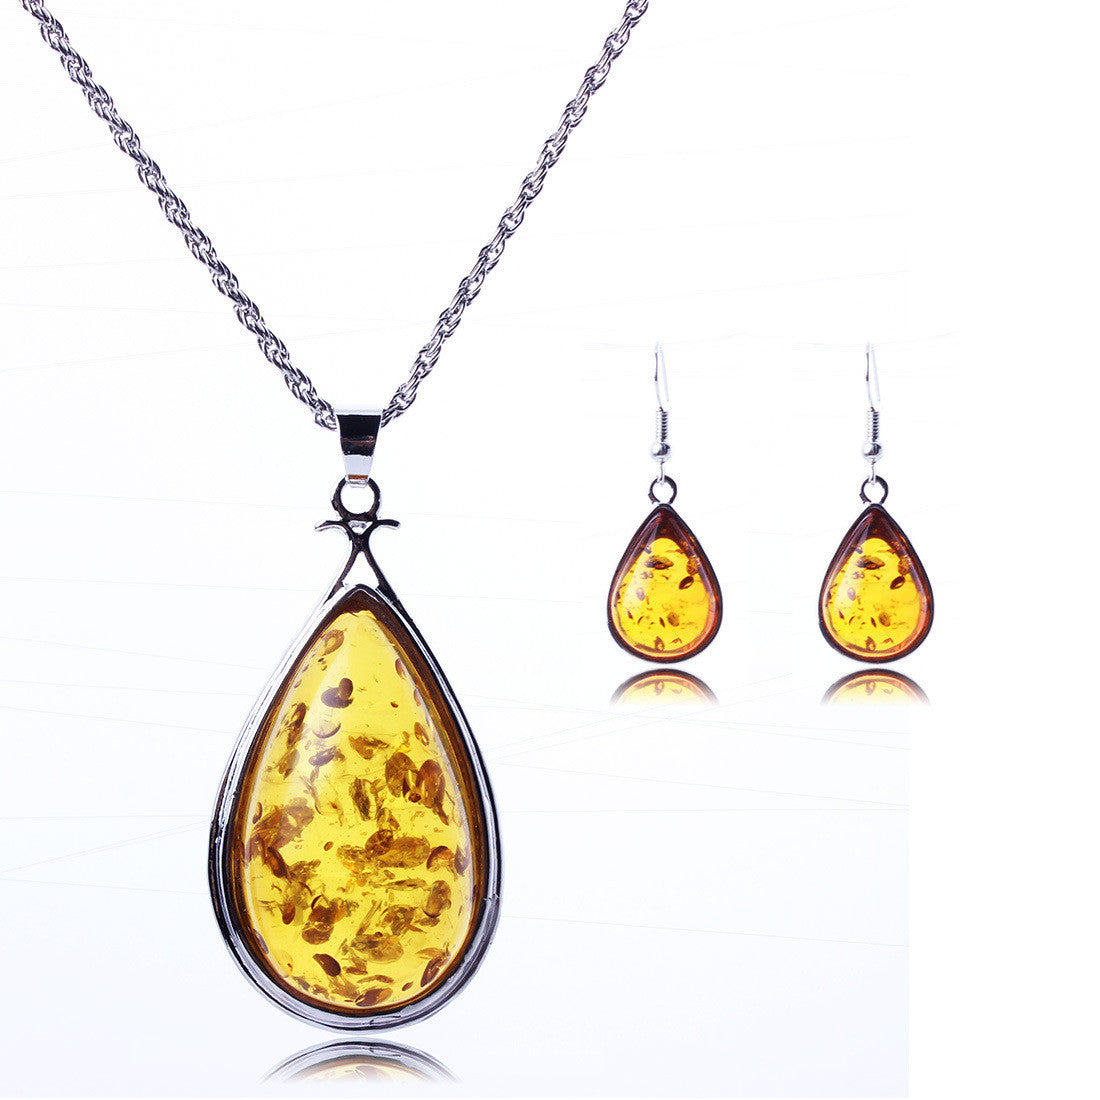 Drop Imitation Amber Necklace Earrings Jewelry Set - Oh Yours Fashion - 1